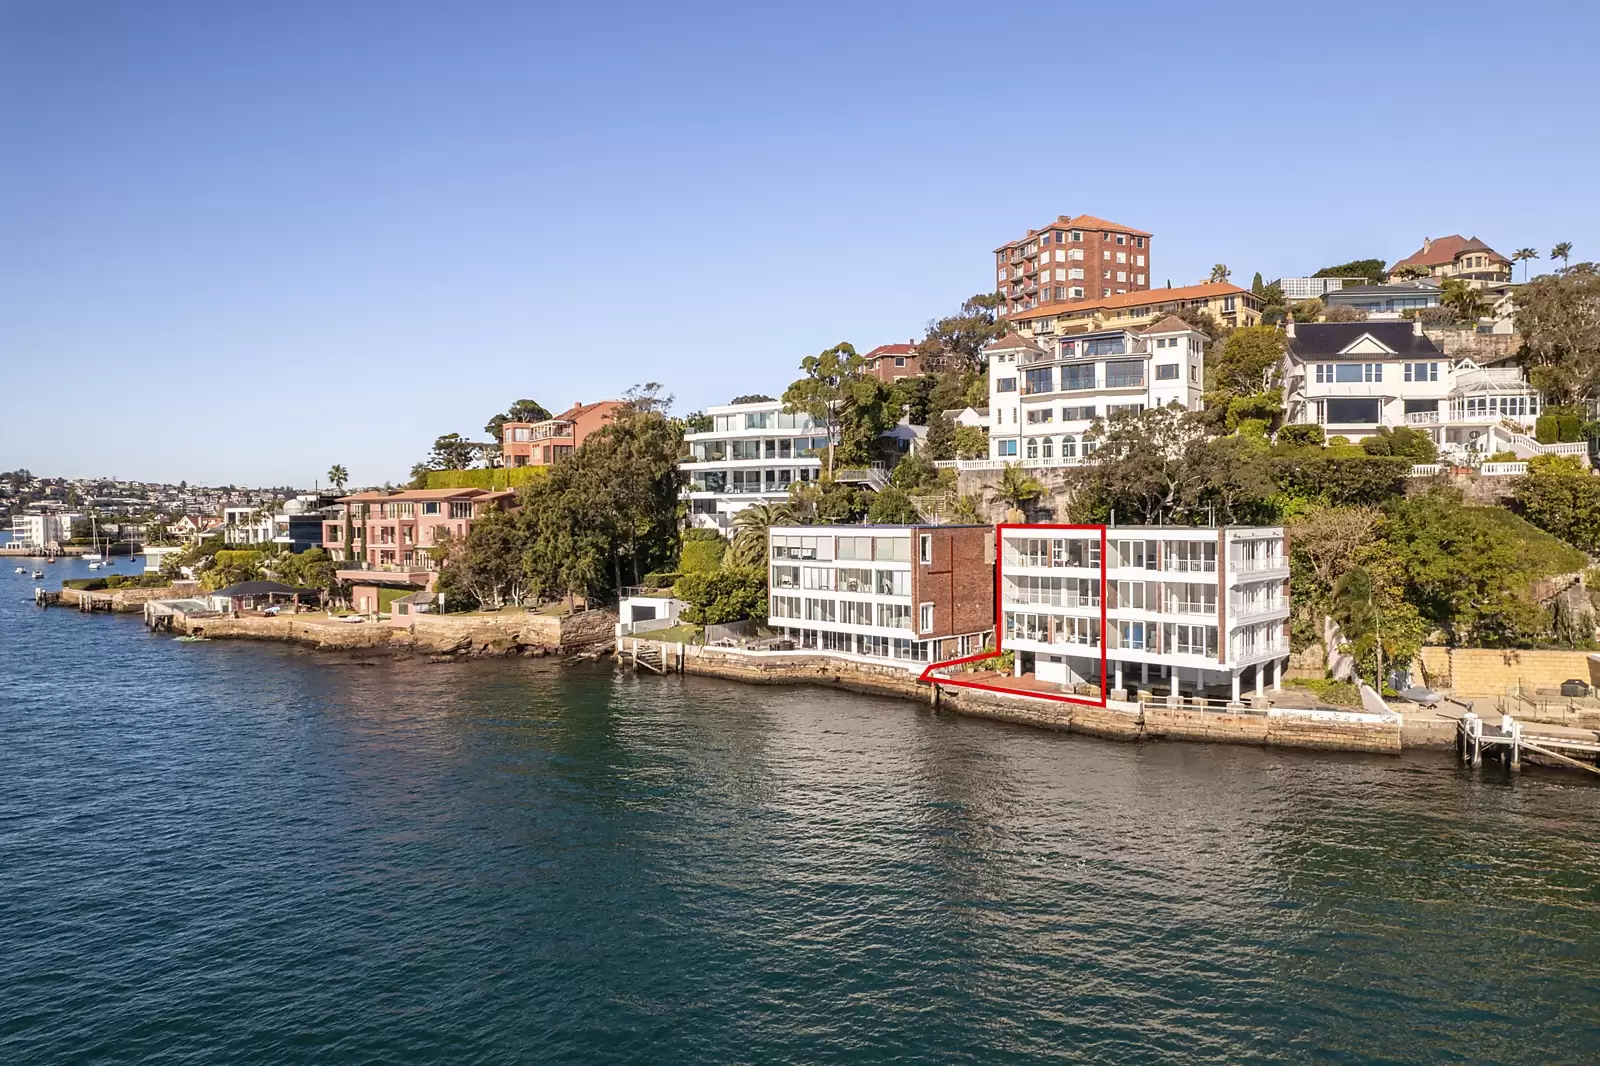 Photo #24: 2/126 Wolseley Road, Point Piper - Sold by Sydney Sotheby's International Realty